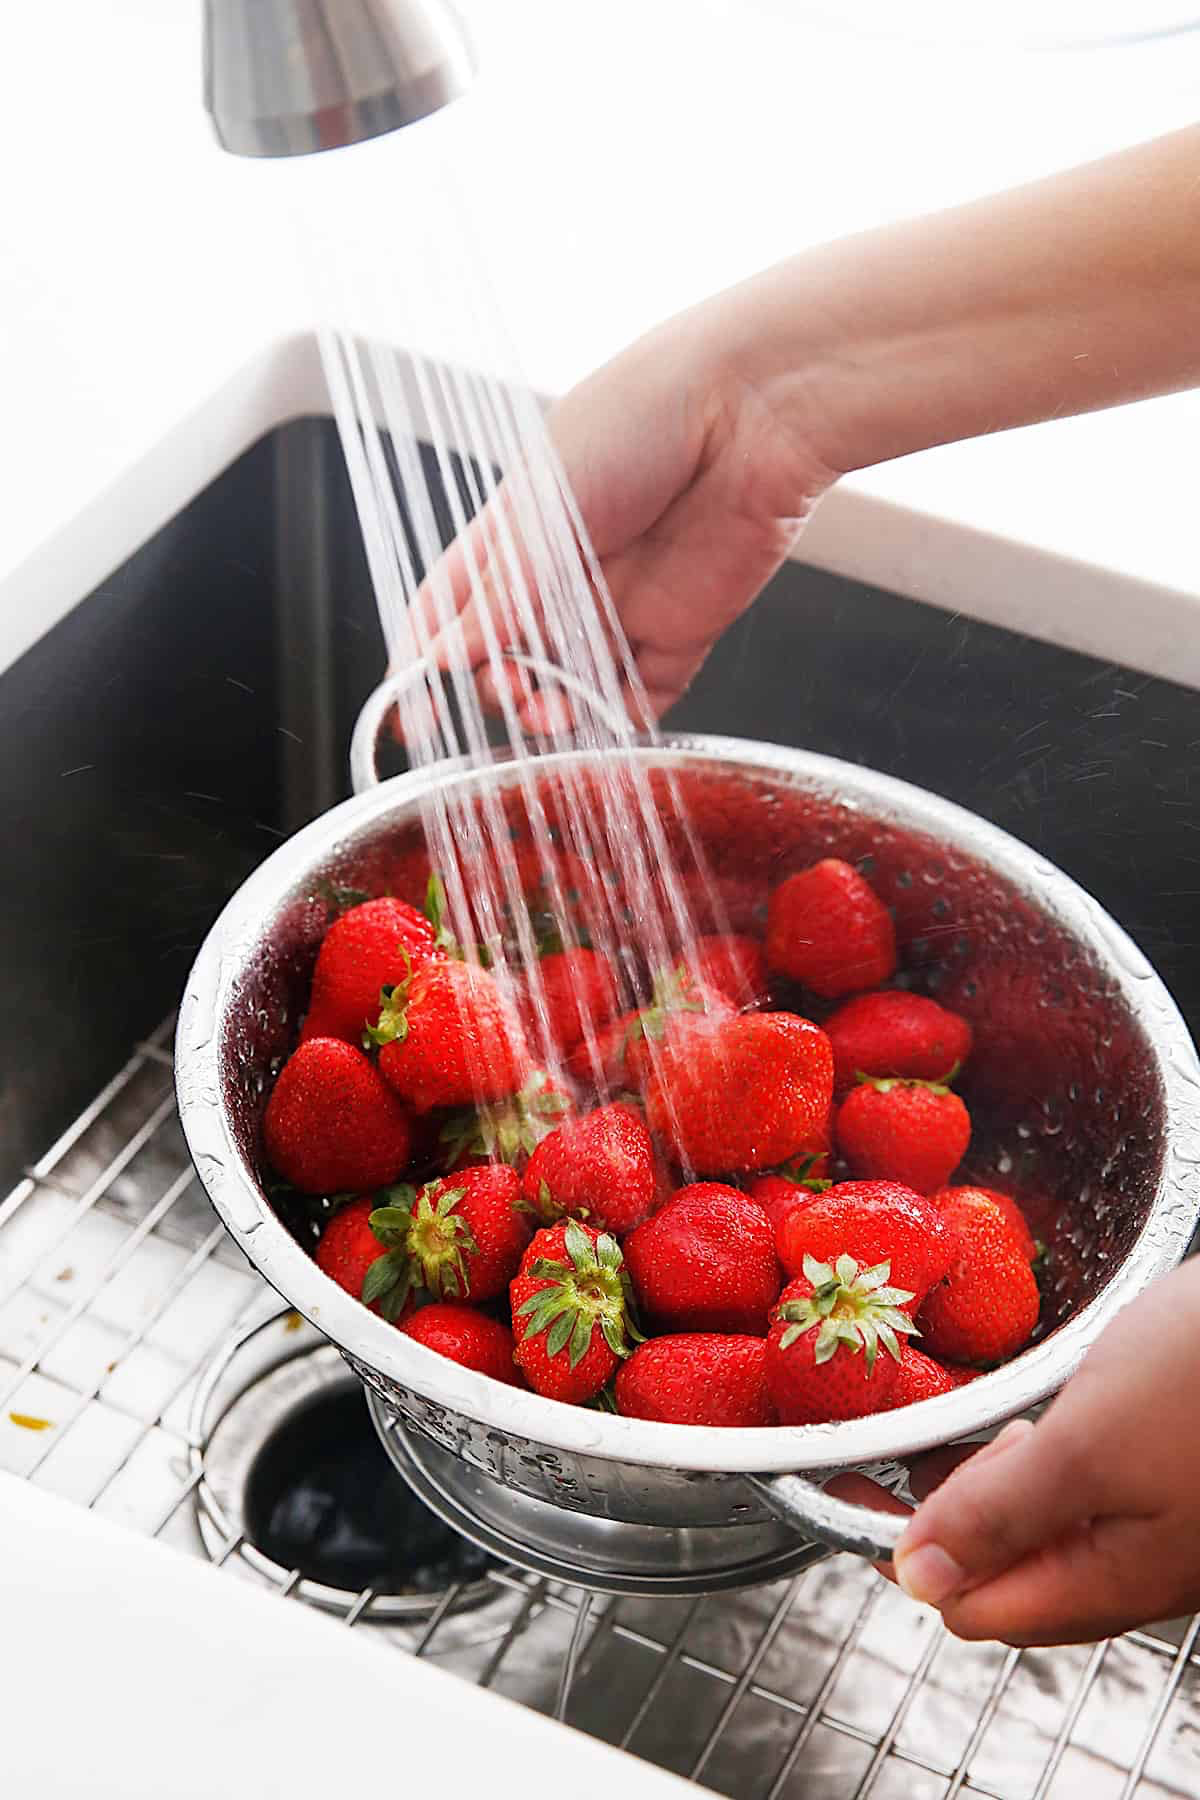 how to properly store berries in the fridge